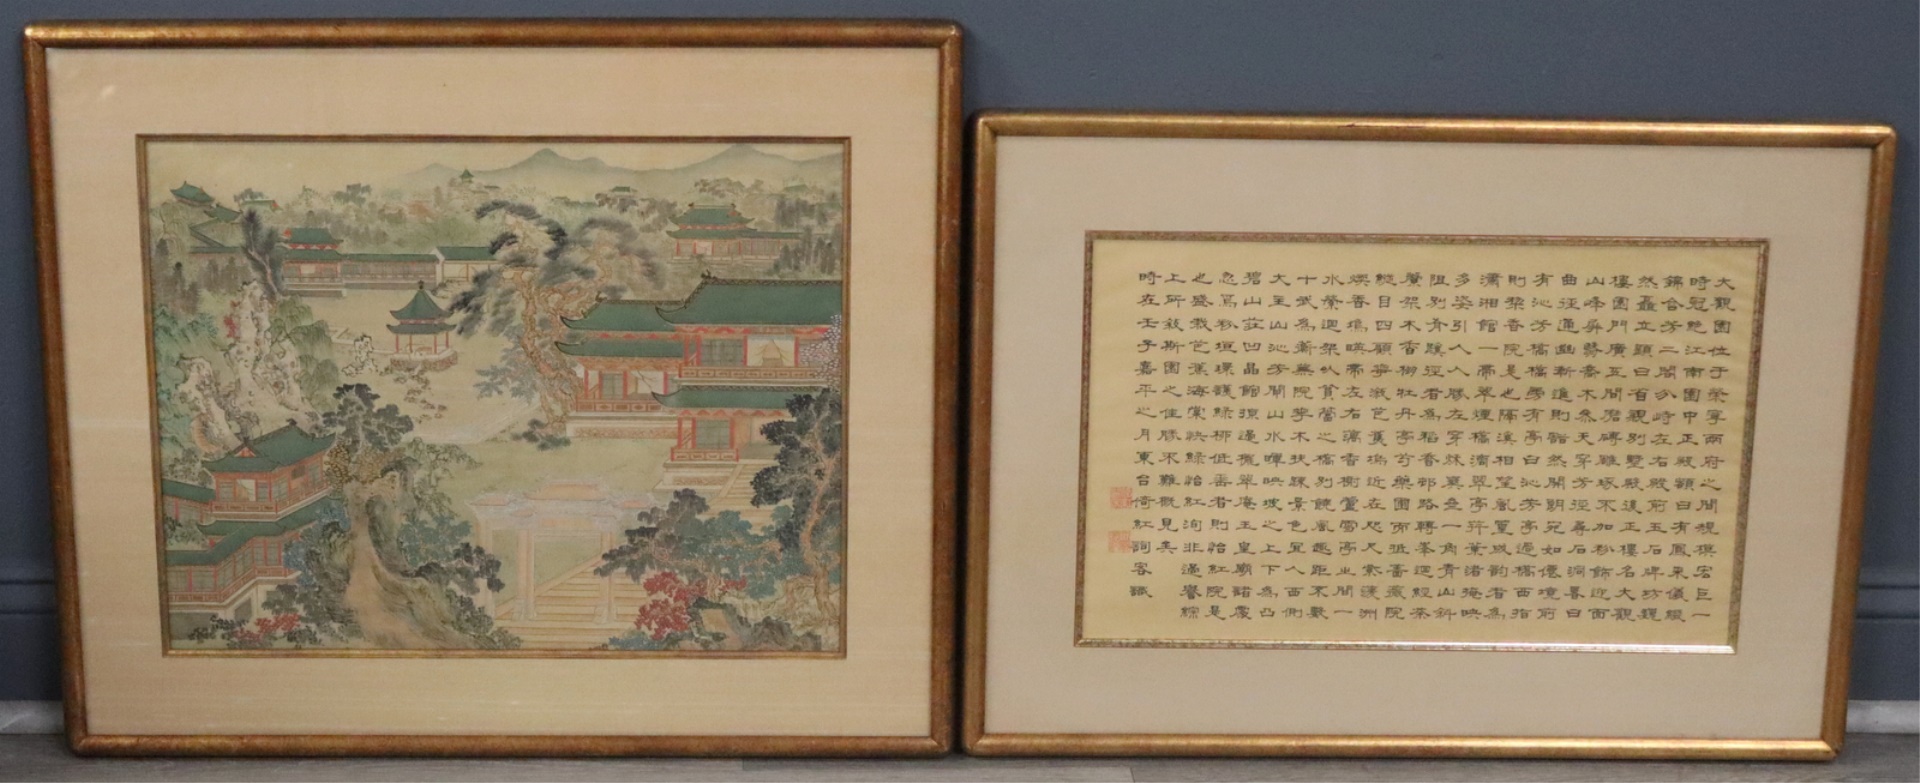 2 PC CHINESE PAINTING AND CALLIGRAPHY  3bcf11